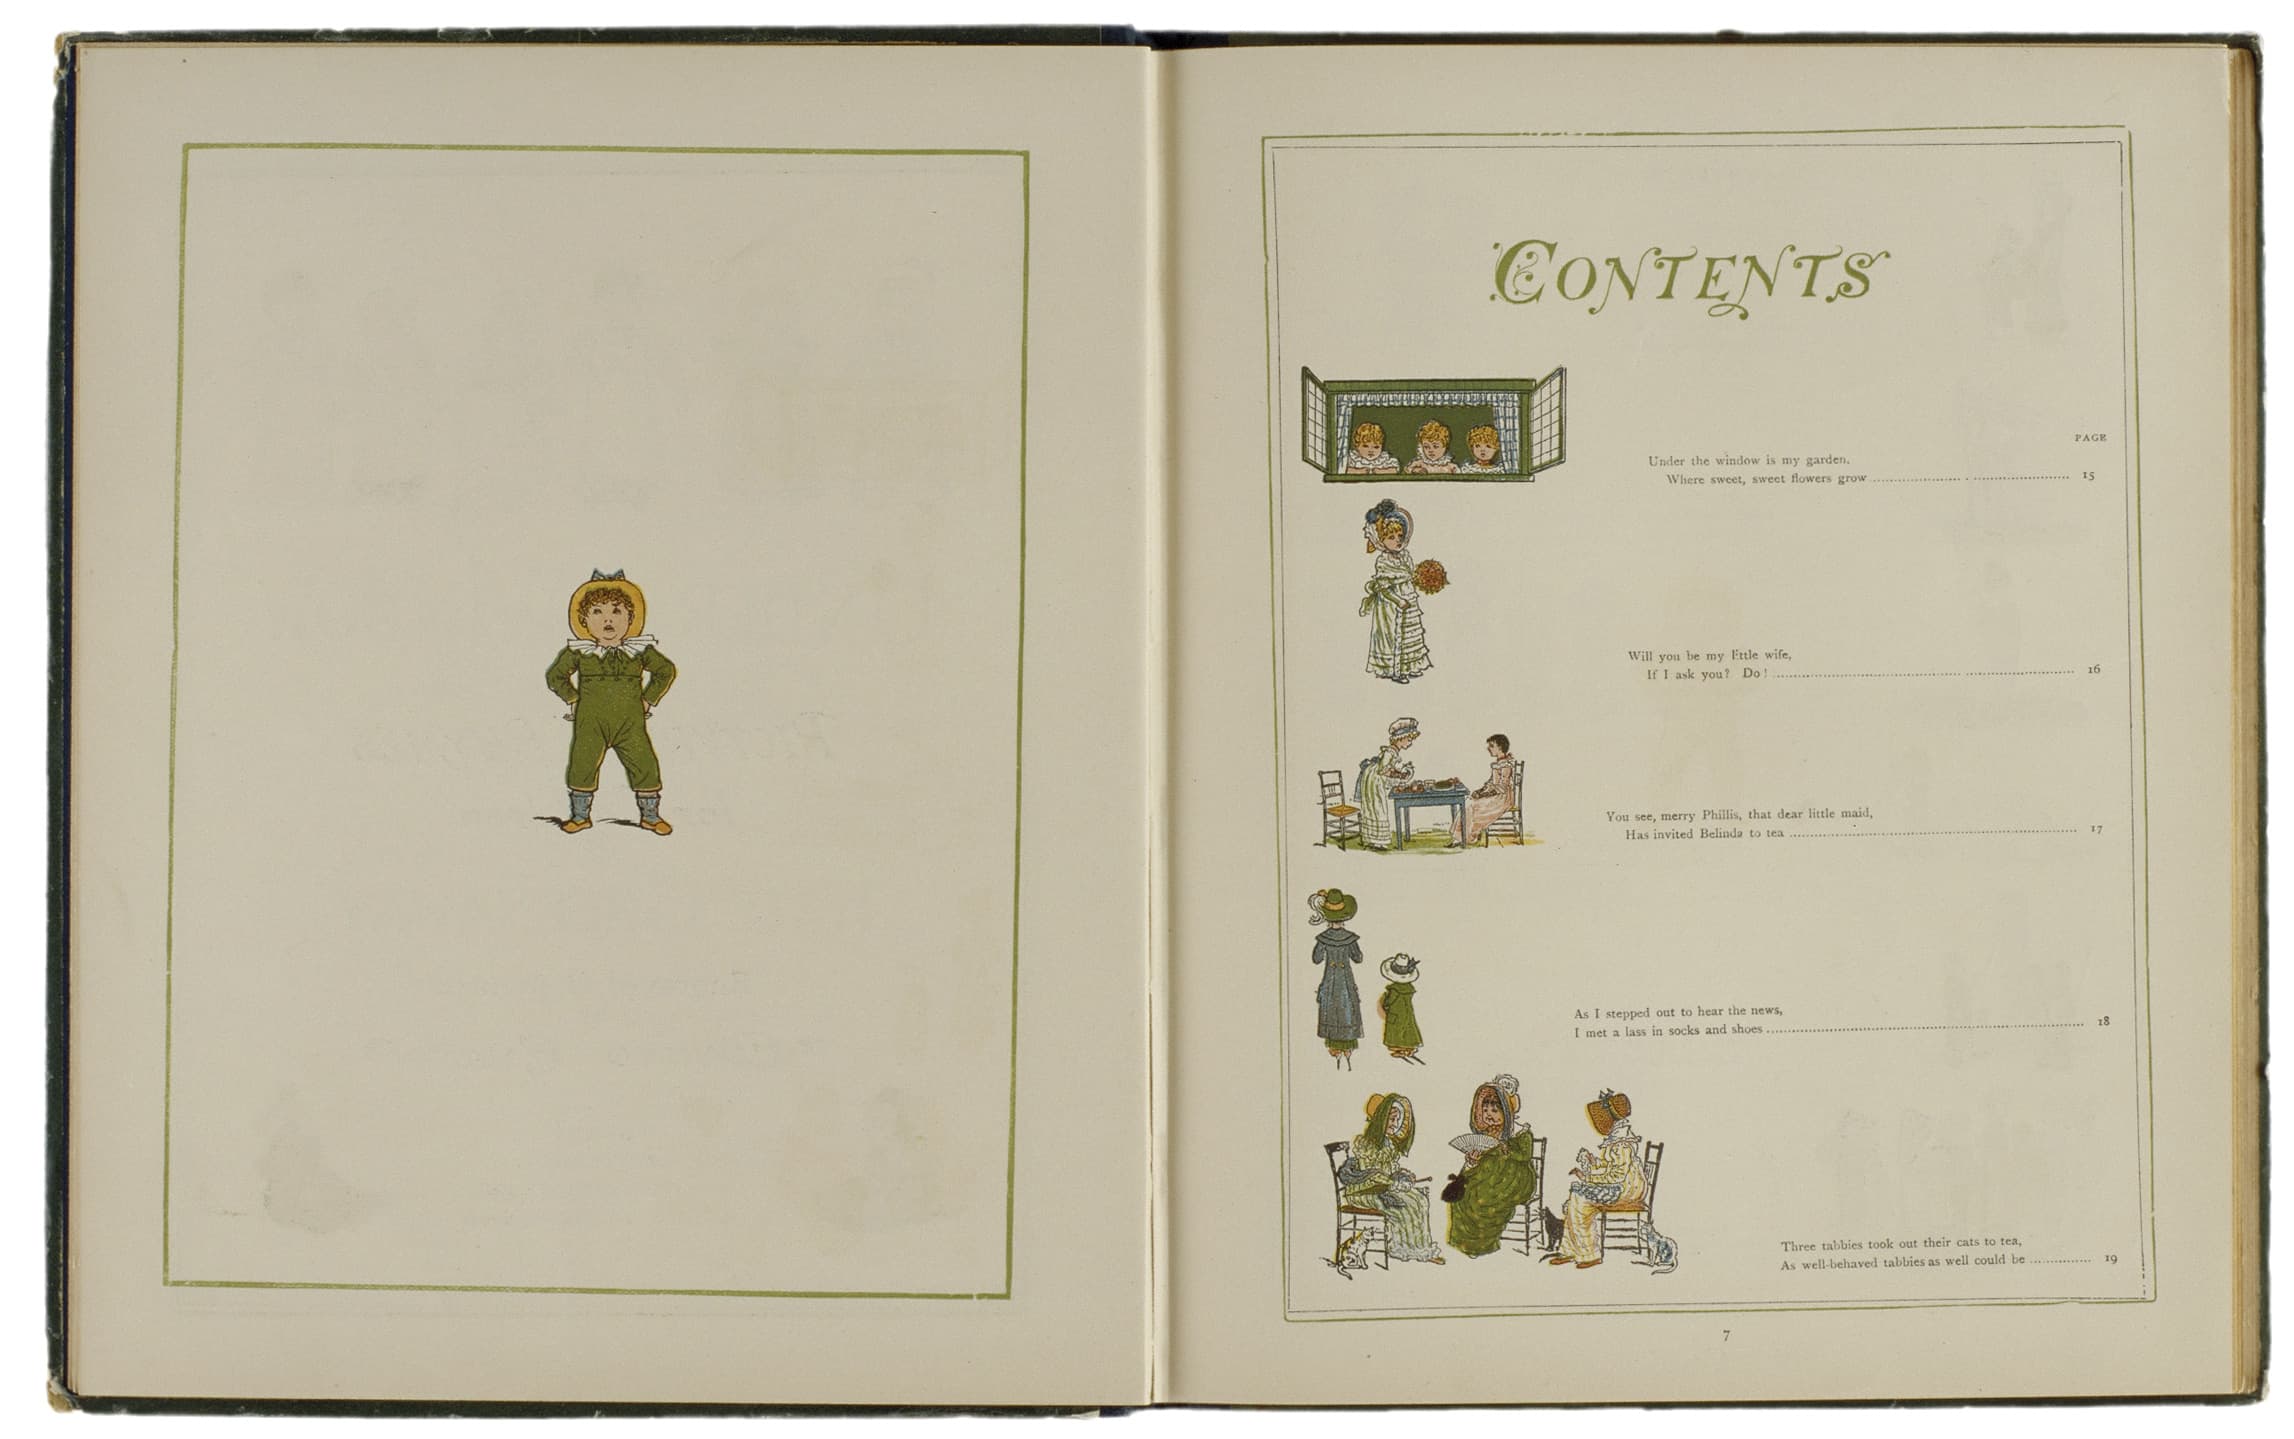 page 6-7 of Under the Window, contents